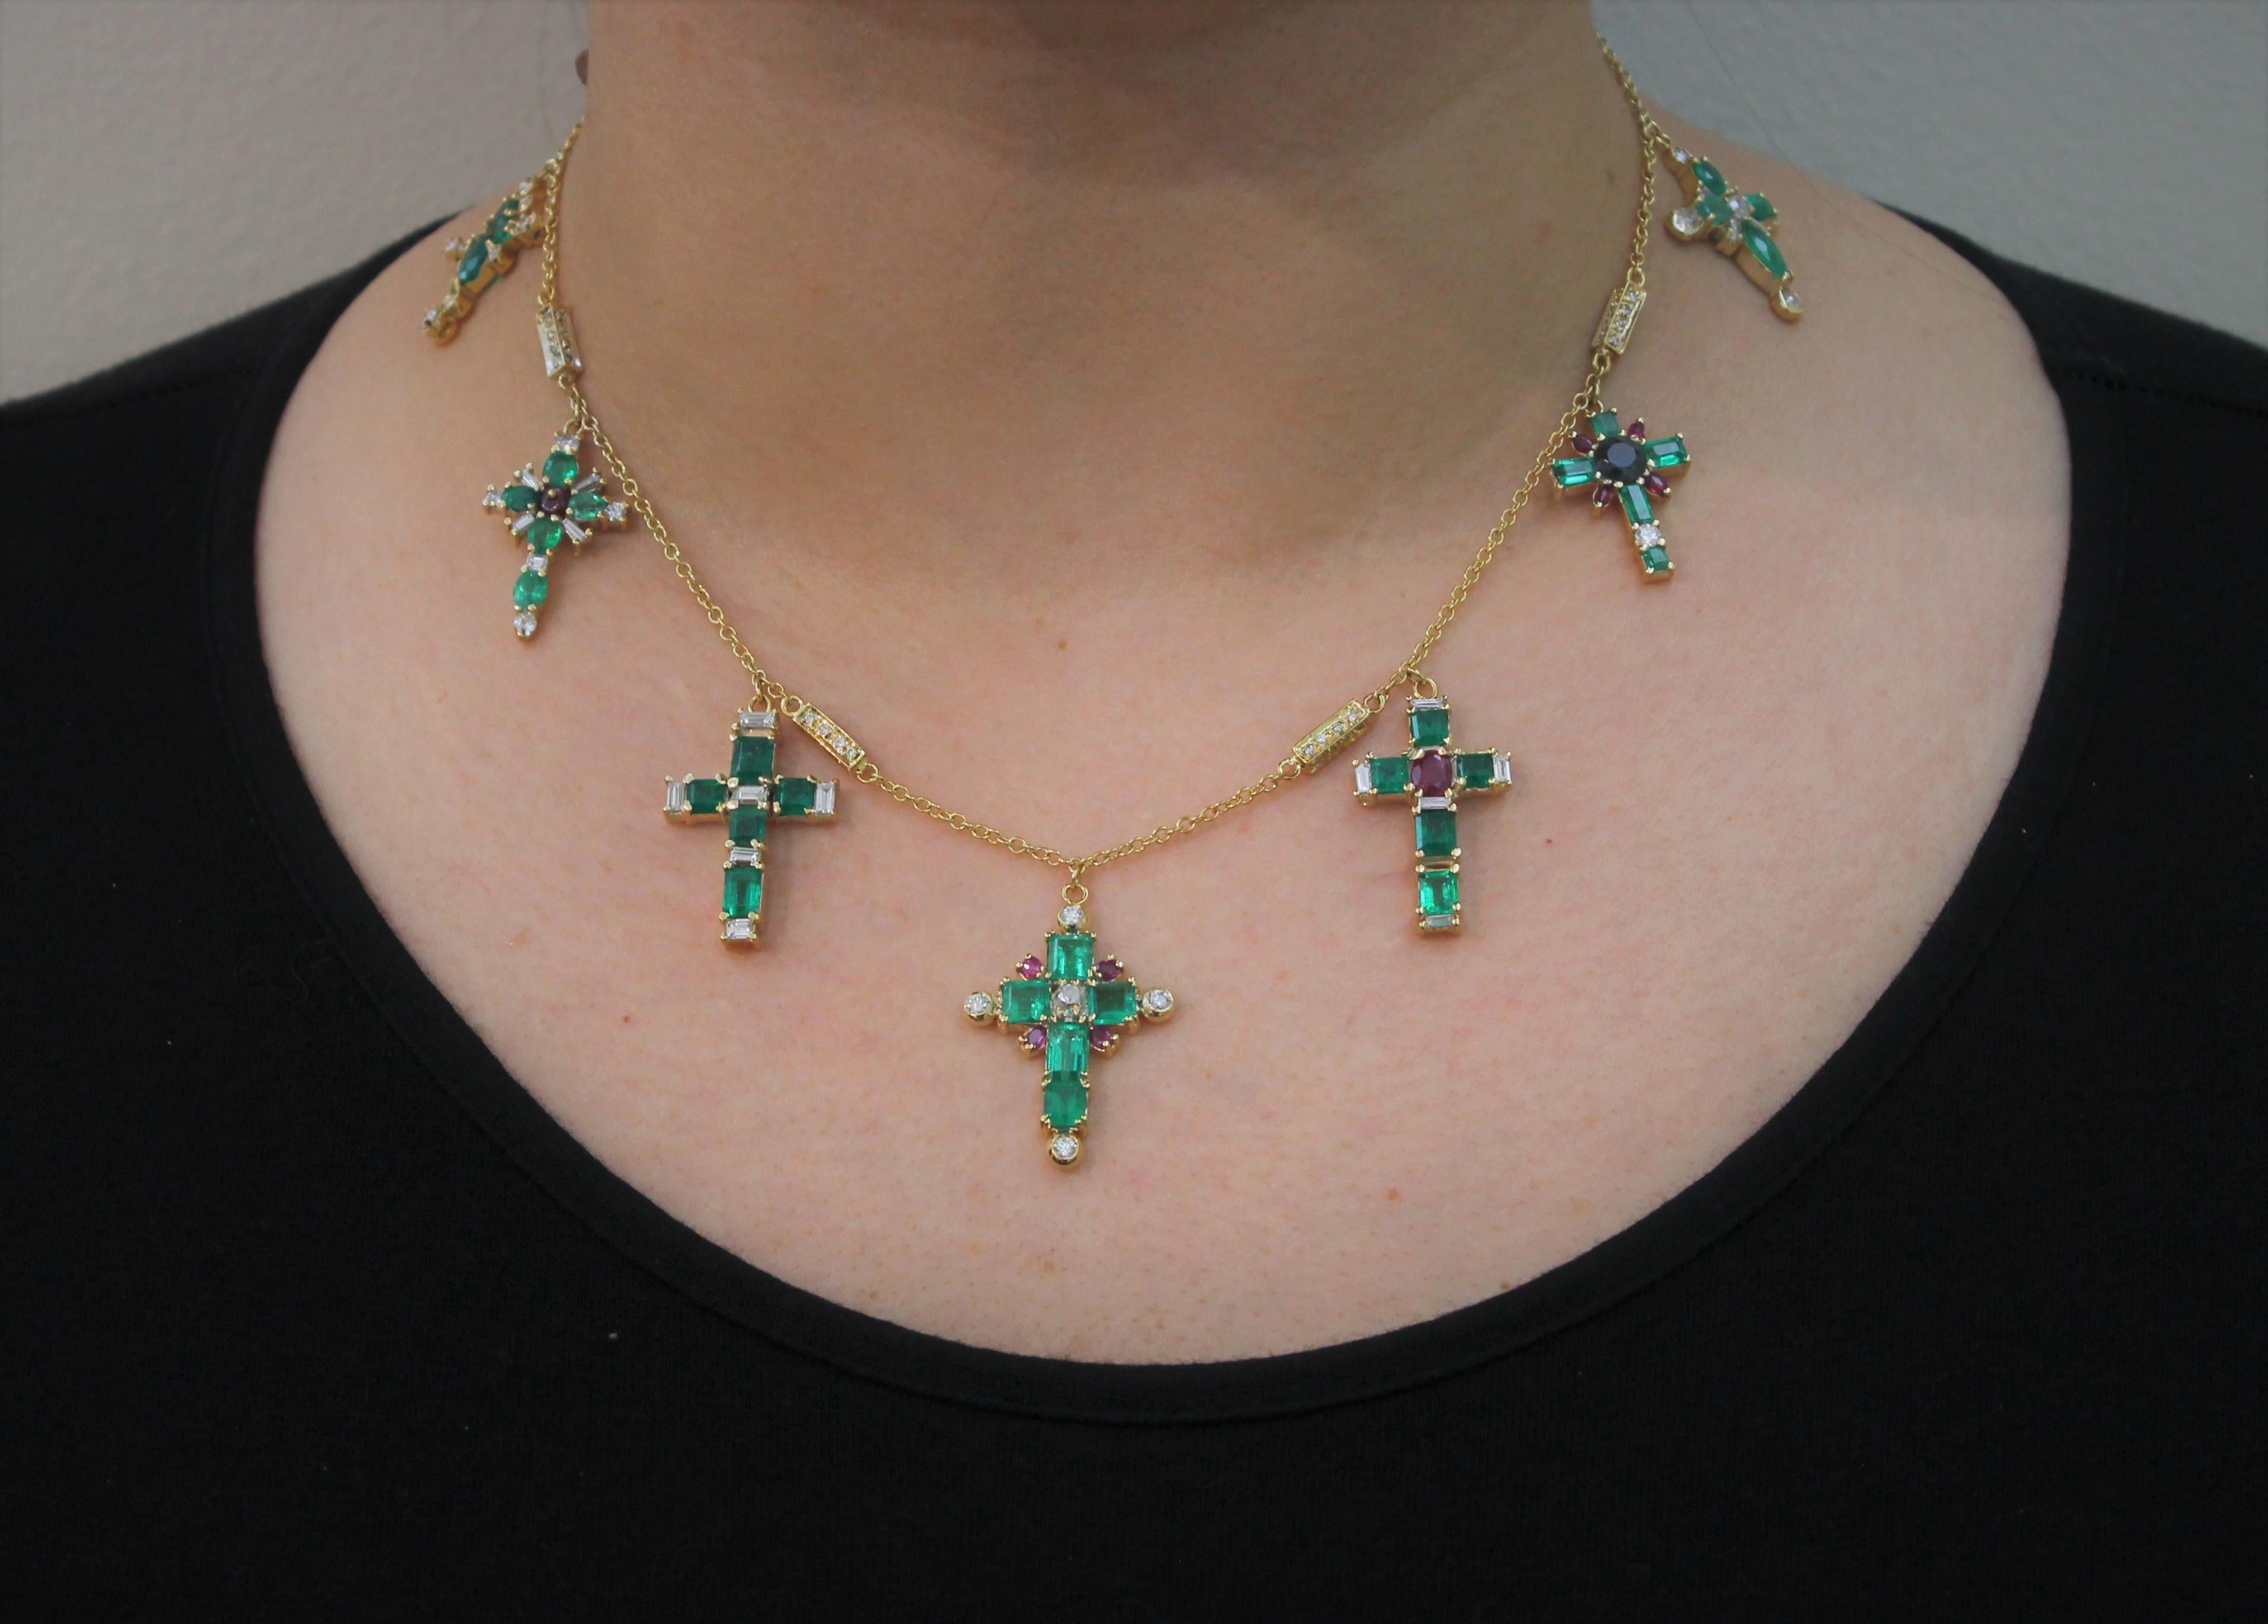 7 Emerald Crosses enriched with Diamonds, Ruby and Sapphire Charms Necklace Hand-Made in Italy . 
The Chain of the Necklace has 6 diamond elements. It is in Yellow-Plated White Gold and is 16